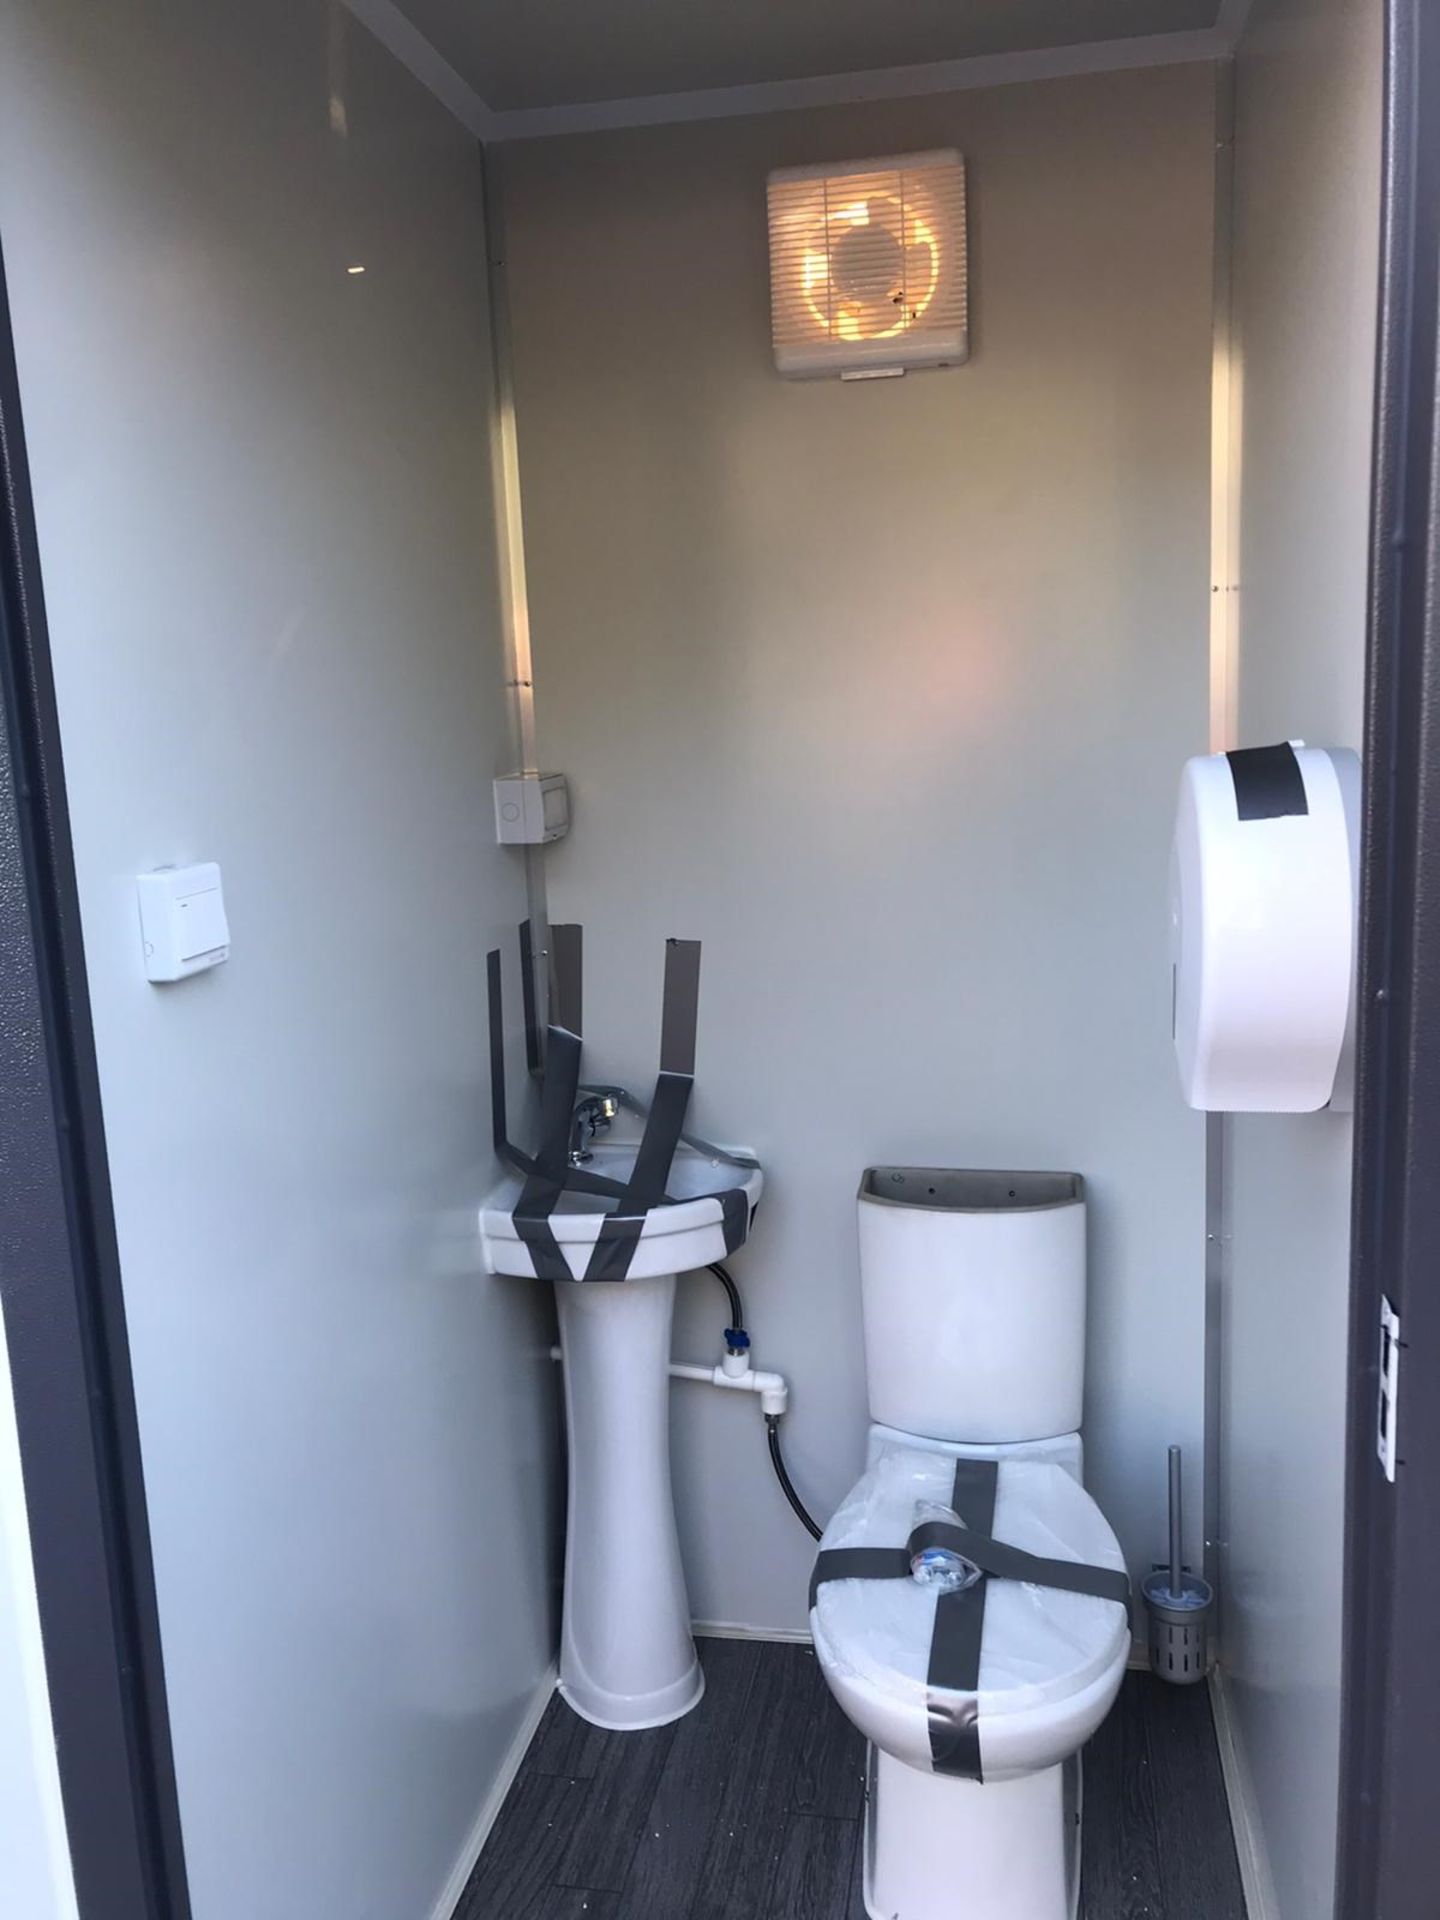 NEW PORTABLE DOUBLE TOILET UNIT / TOILET BLOCK MENS WOMENS, C/W SINK & TOILET, FORKLIFT 4-WAY ENTRY - Image 3 of 3